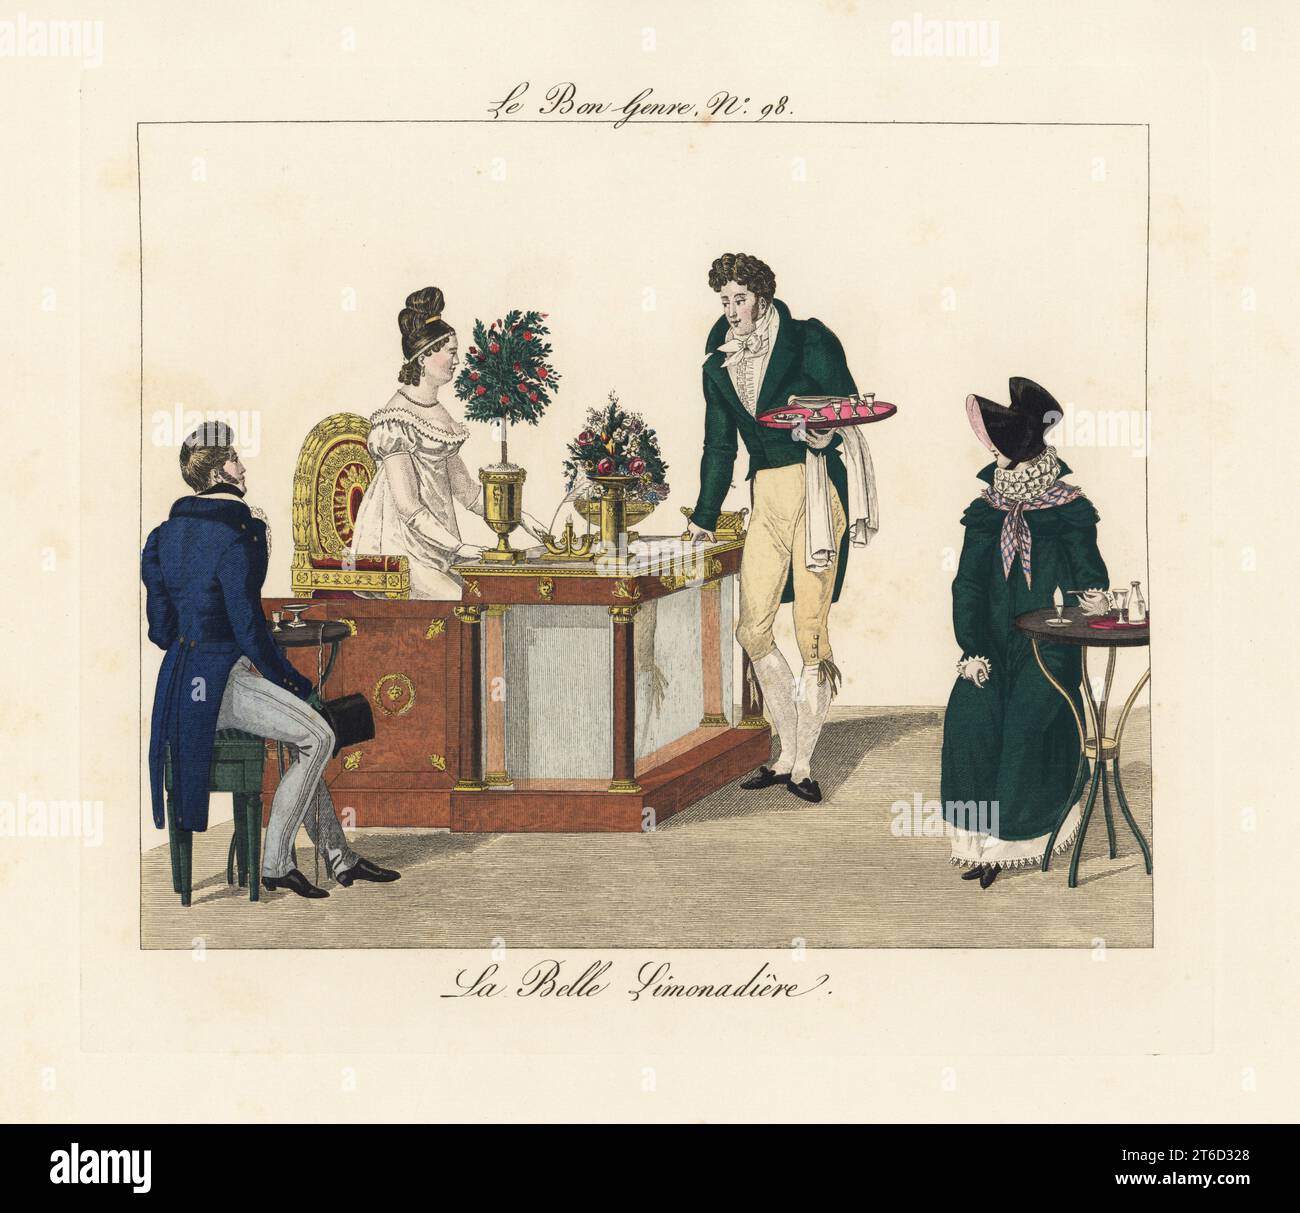 Madame Romain, the beautiful lemonade seller, at the Cafe des Mille Colonnes in the Palais Royal, Paris, seated on her throne and surrounded by her admirers. La belle limonadiere. A waiter carries a tray of drinks. Handcoloured engraving from Pierre de la Mesangere's Le Bon Genre, Paris, 1817. Stock Photo